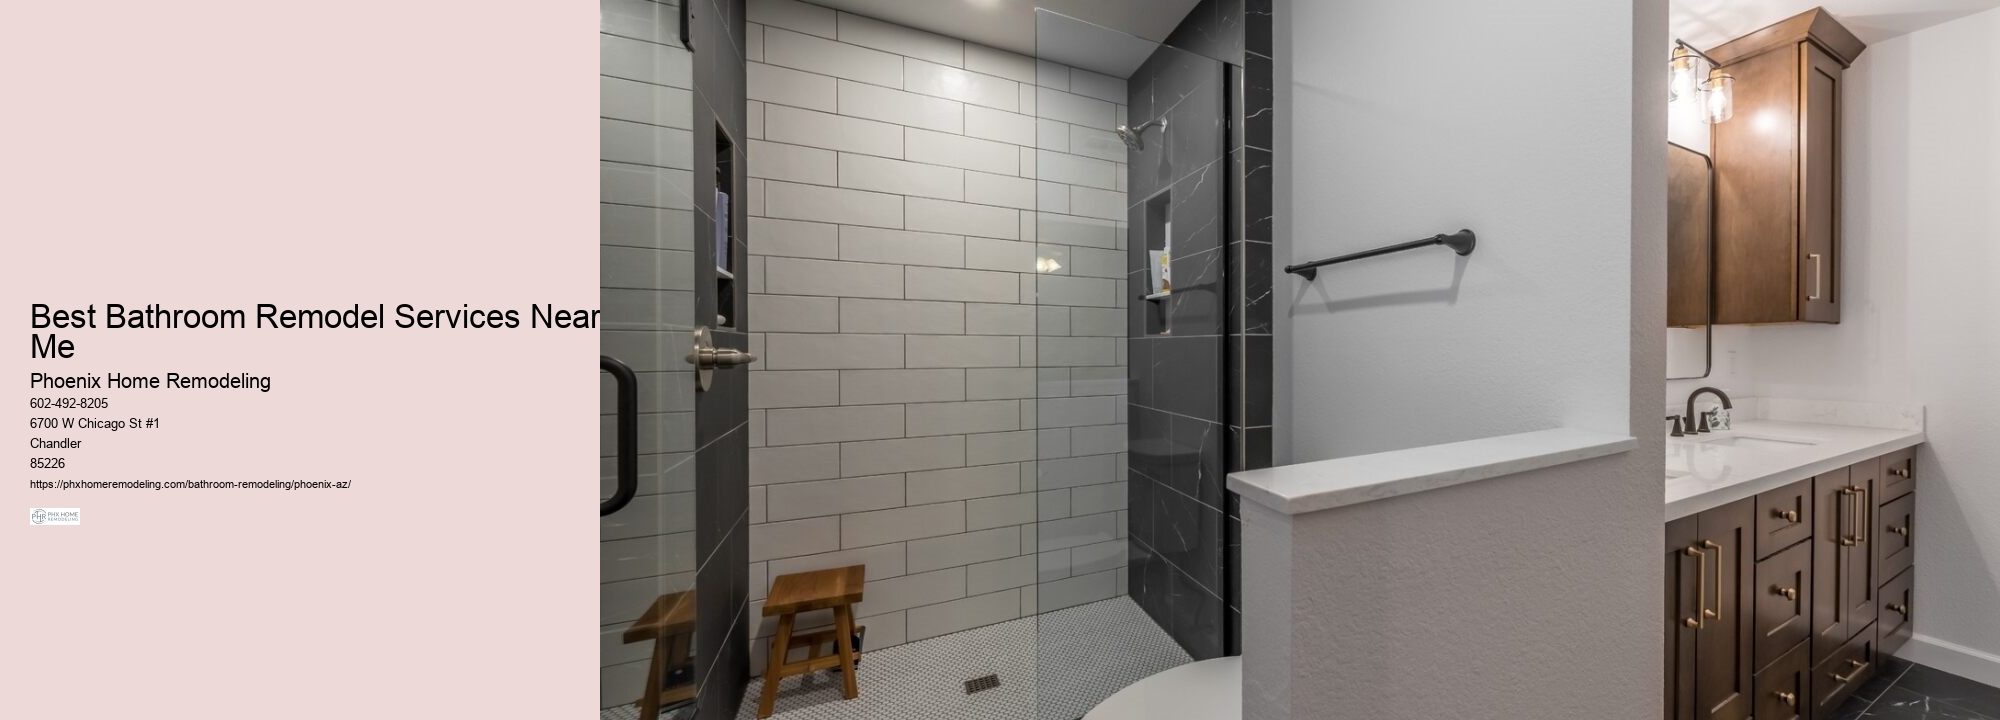 Best Bathroom Remodel Services Near Me